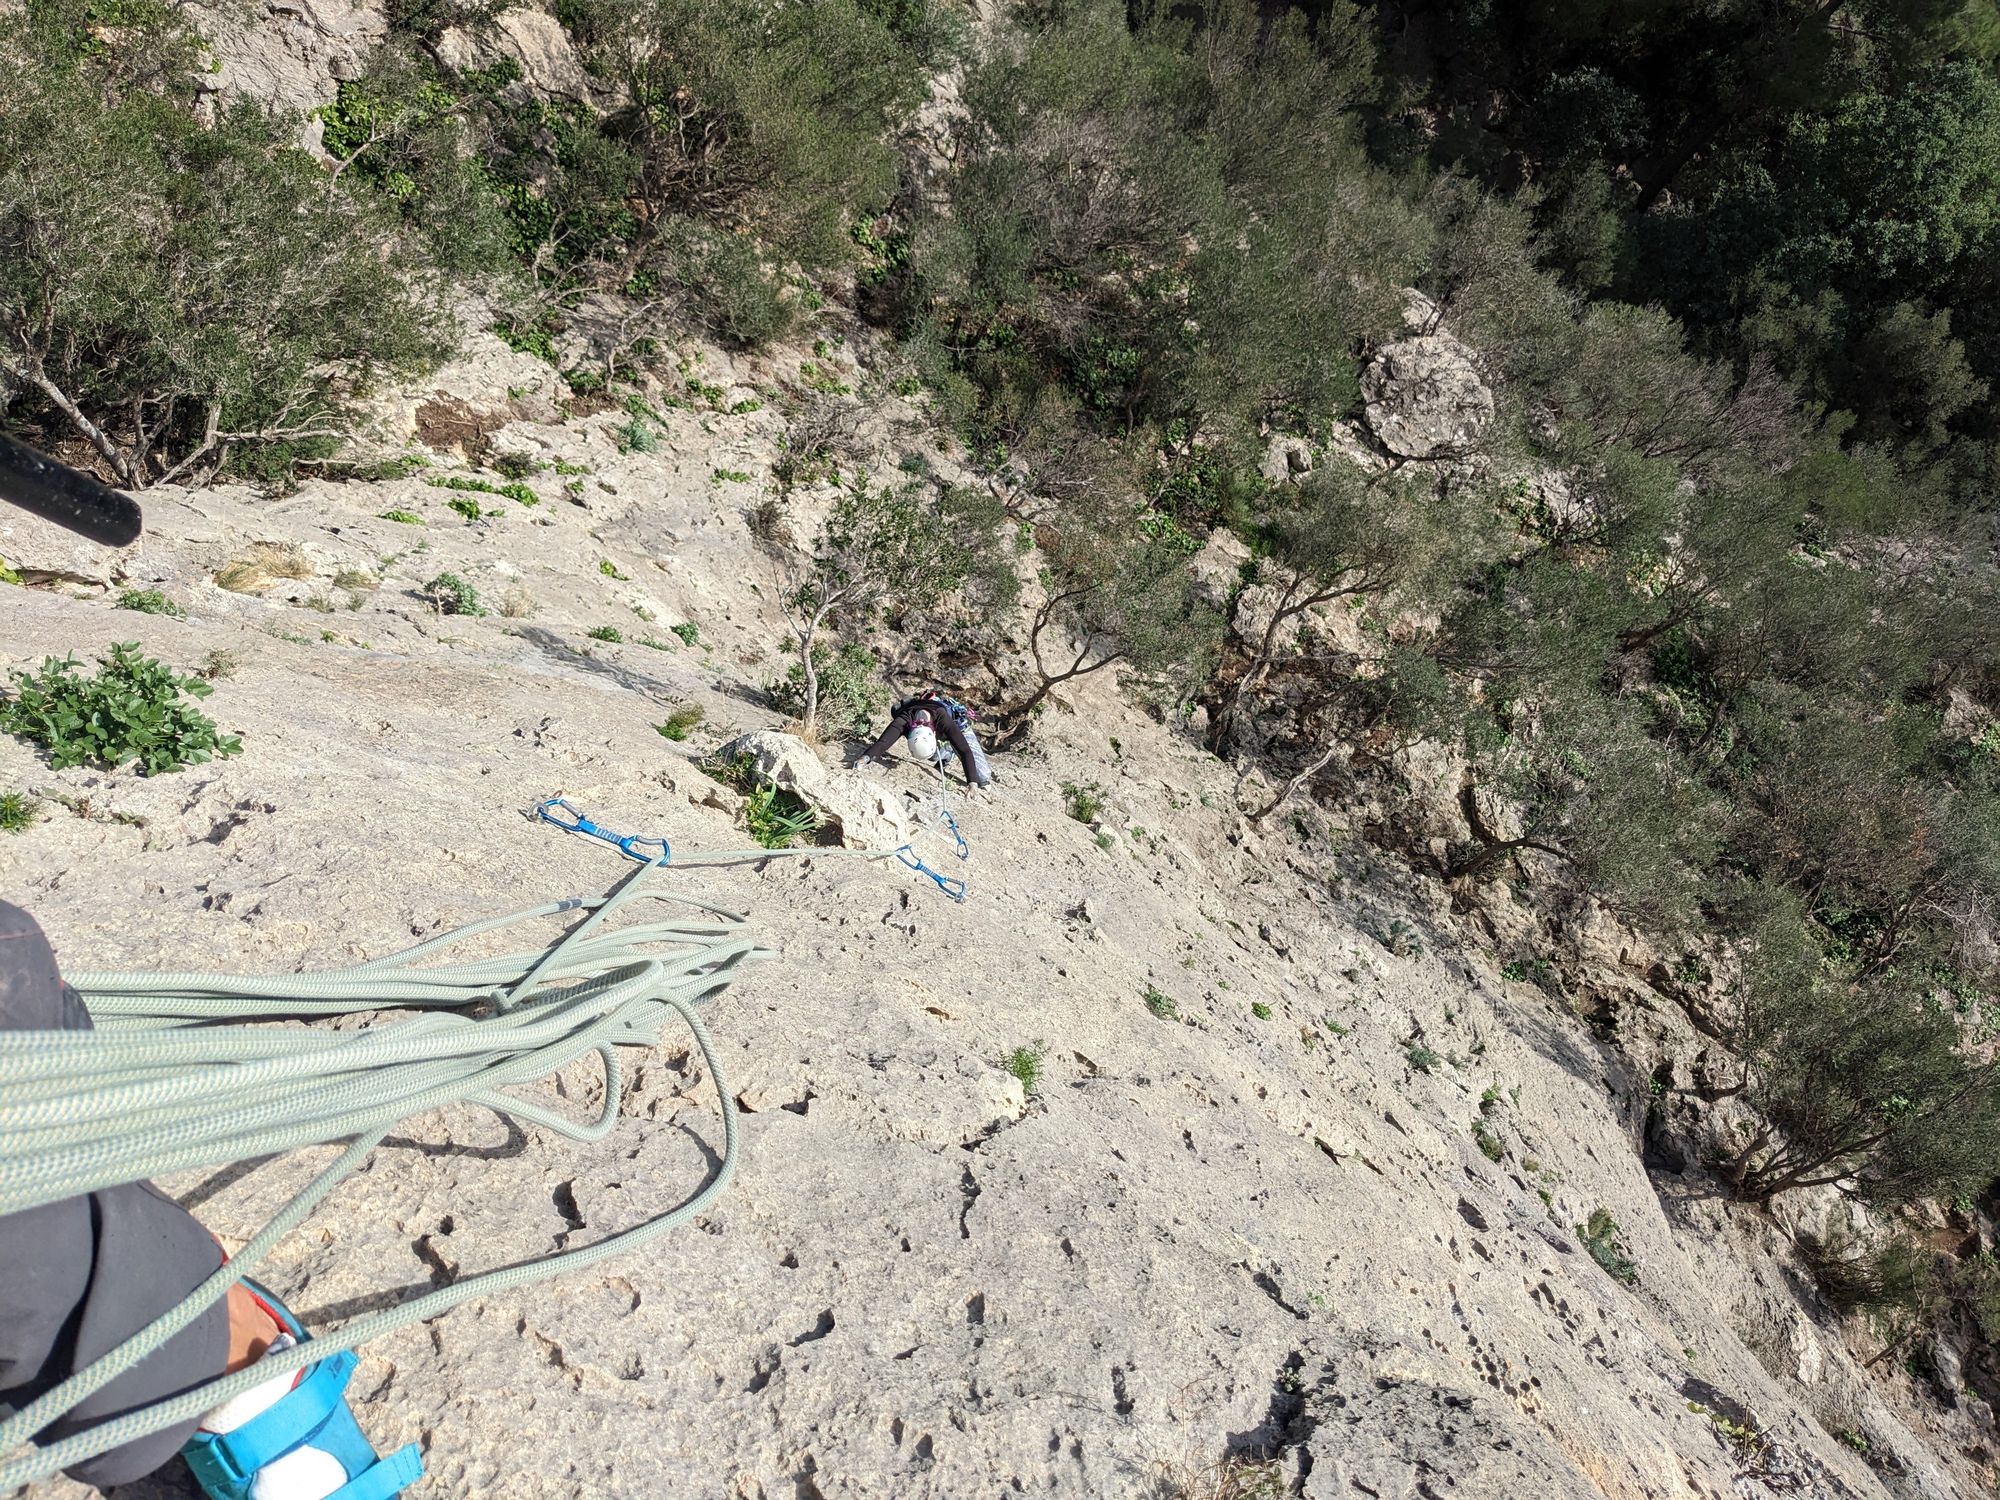 The multi pitch lines of Paret dels Coloms on Mallorca